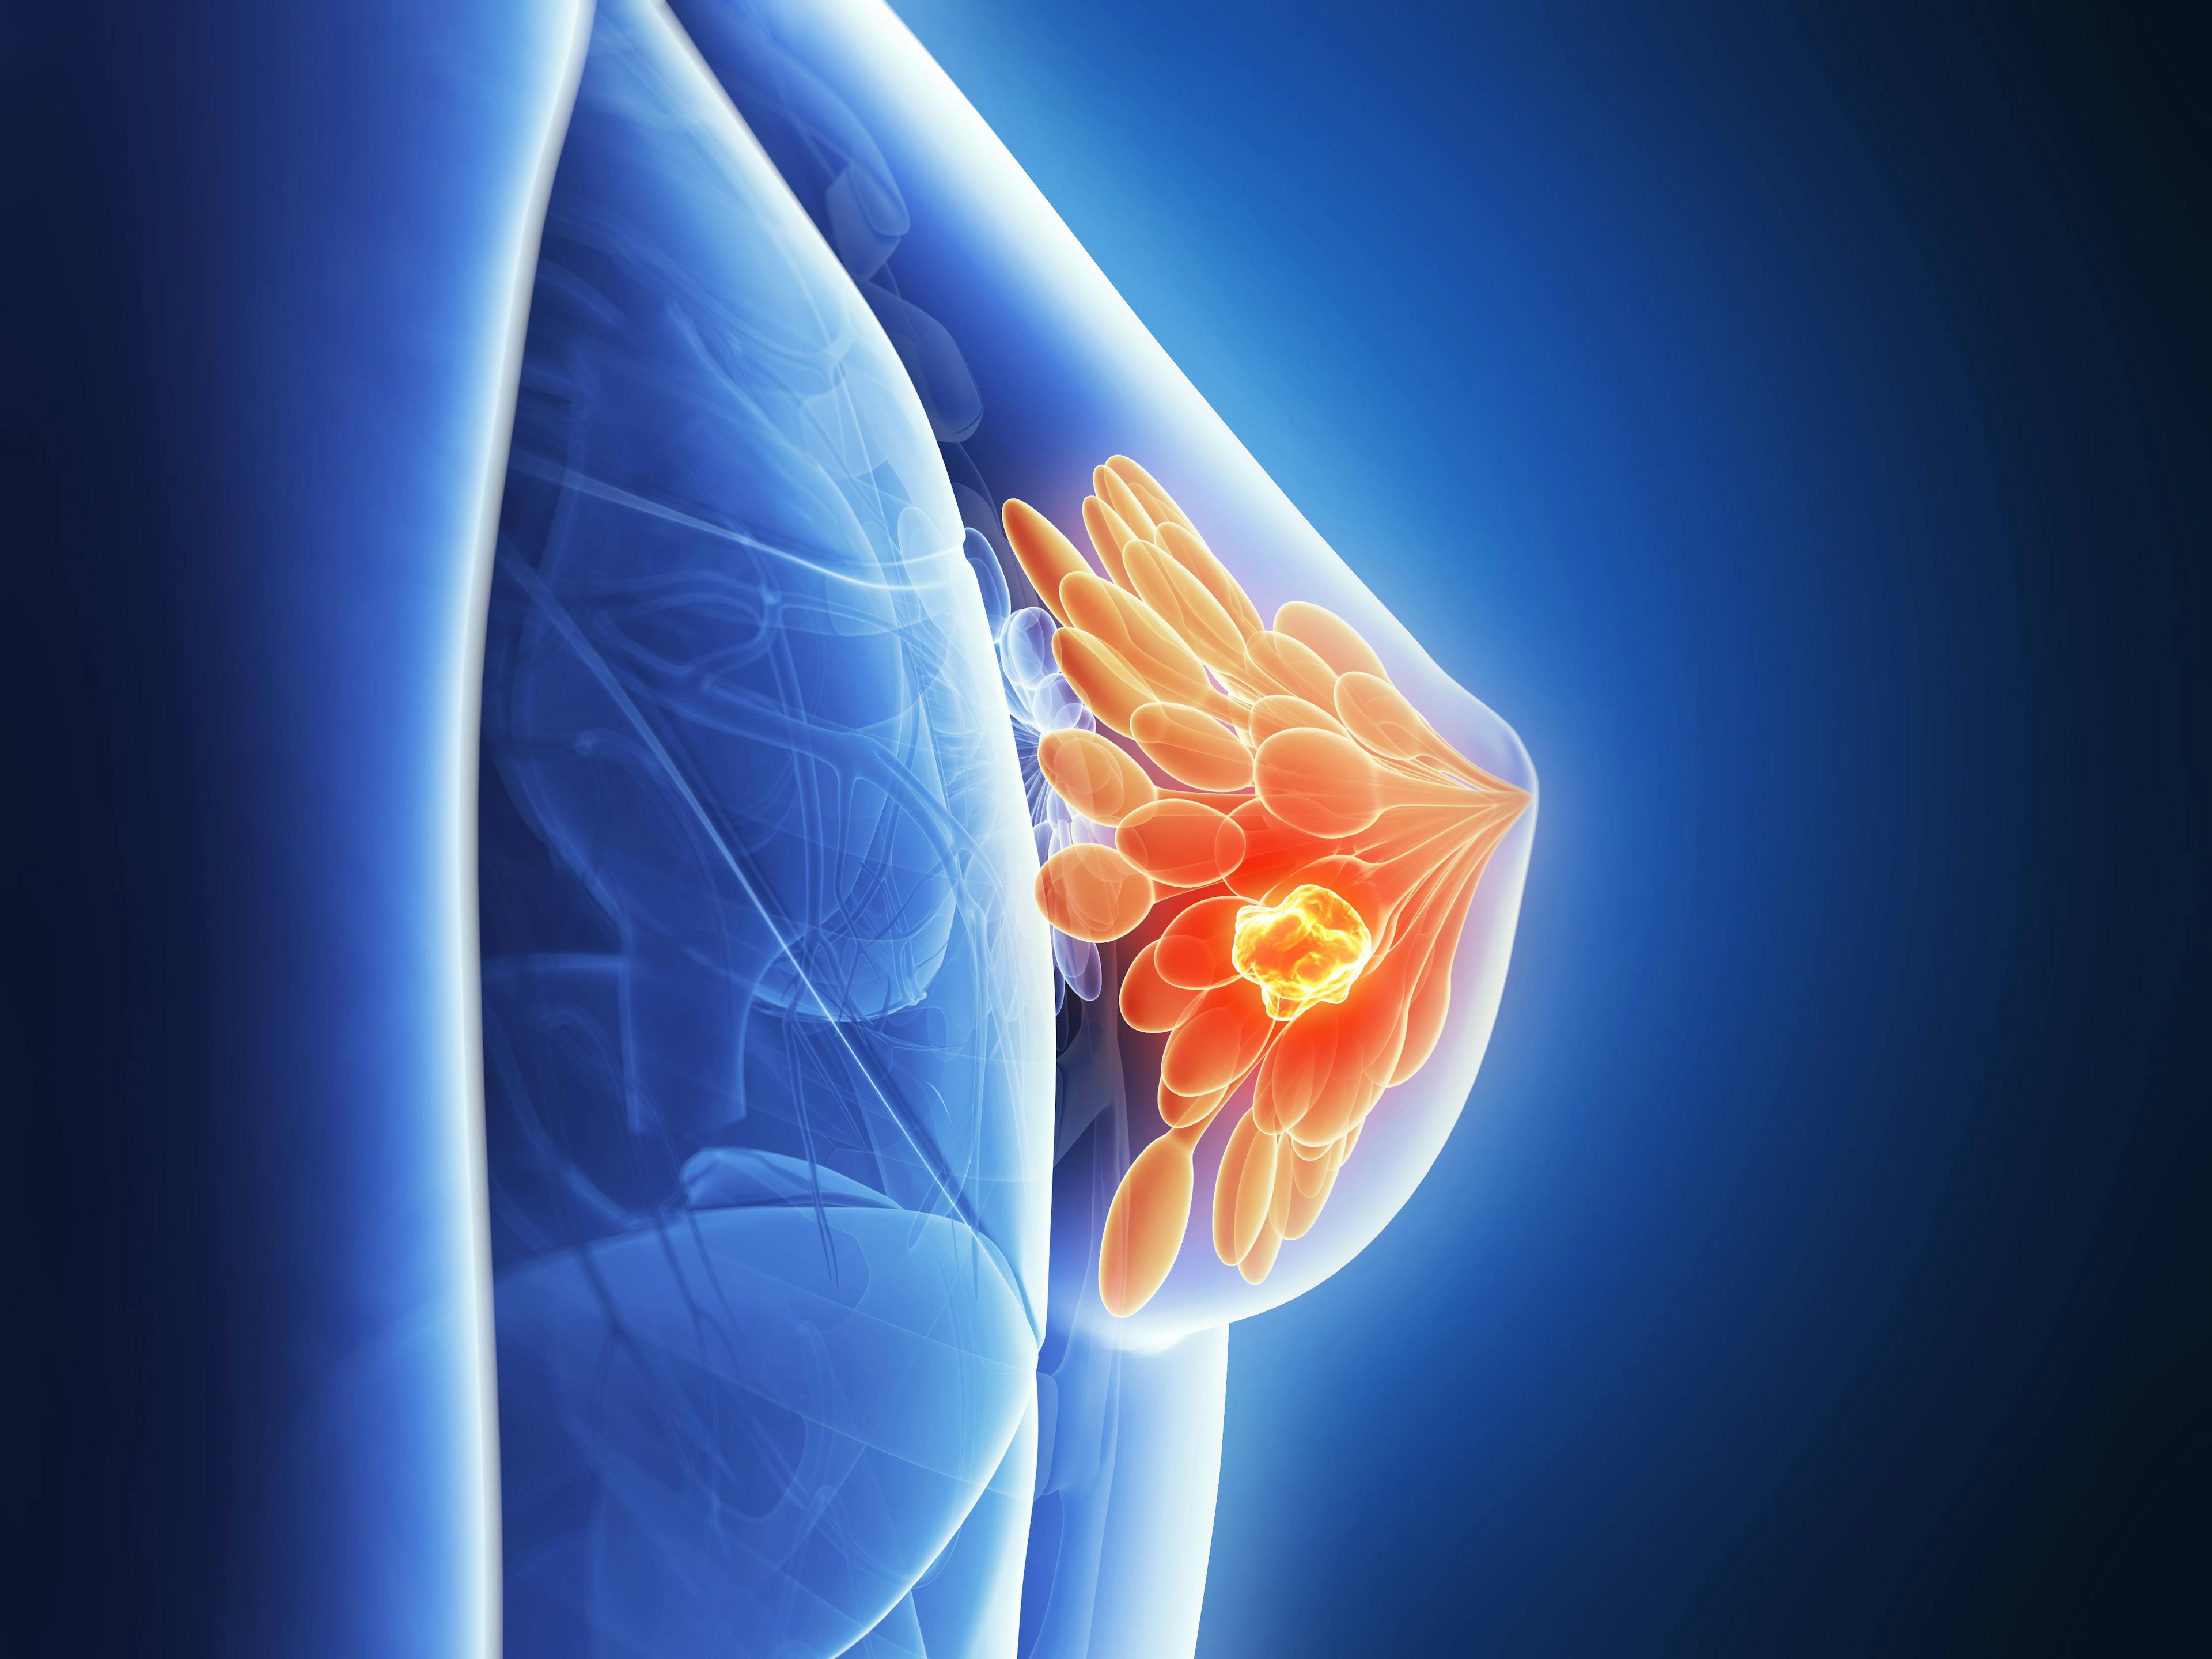 Combination everolimus/letrozole yielded a higher progression-free survival over letrozole alone in a population of patients with hormone receptor (HR)–positive, ERBB2-negative advanced breast cancer.